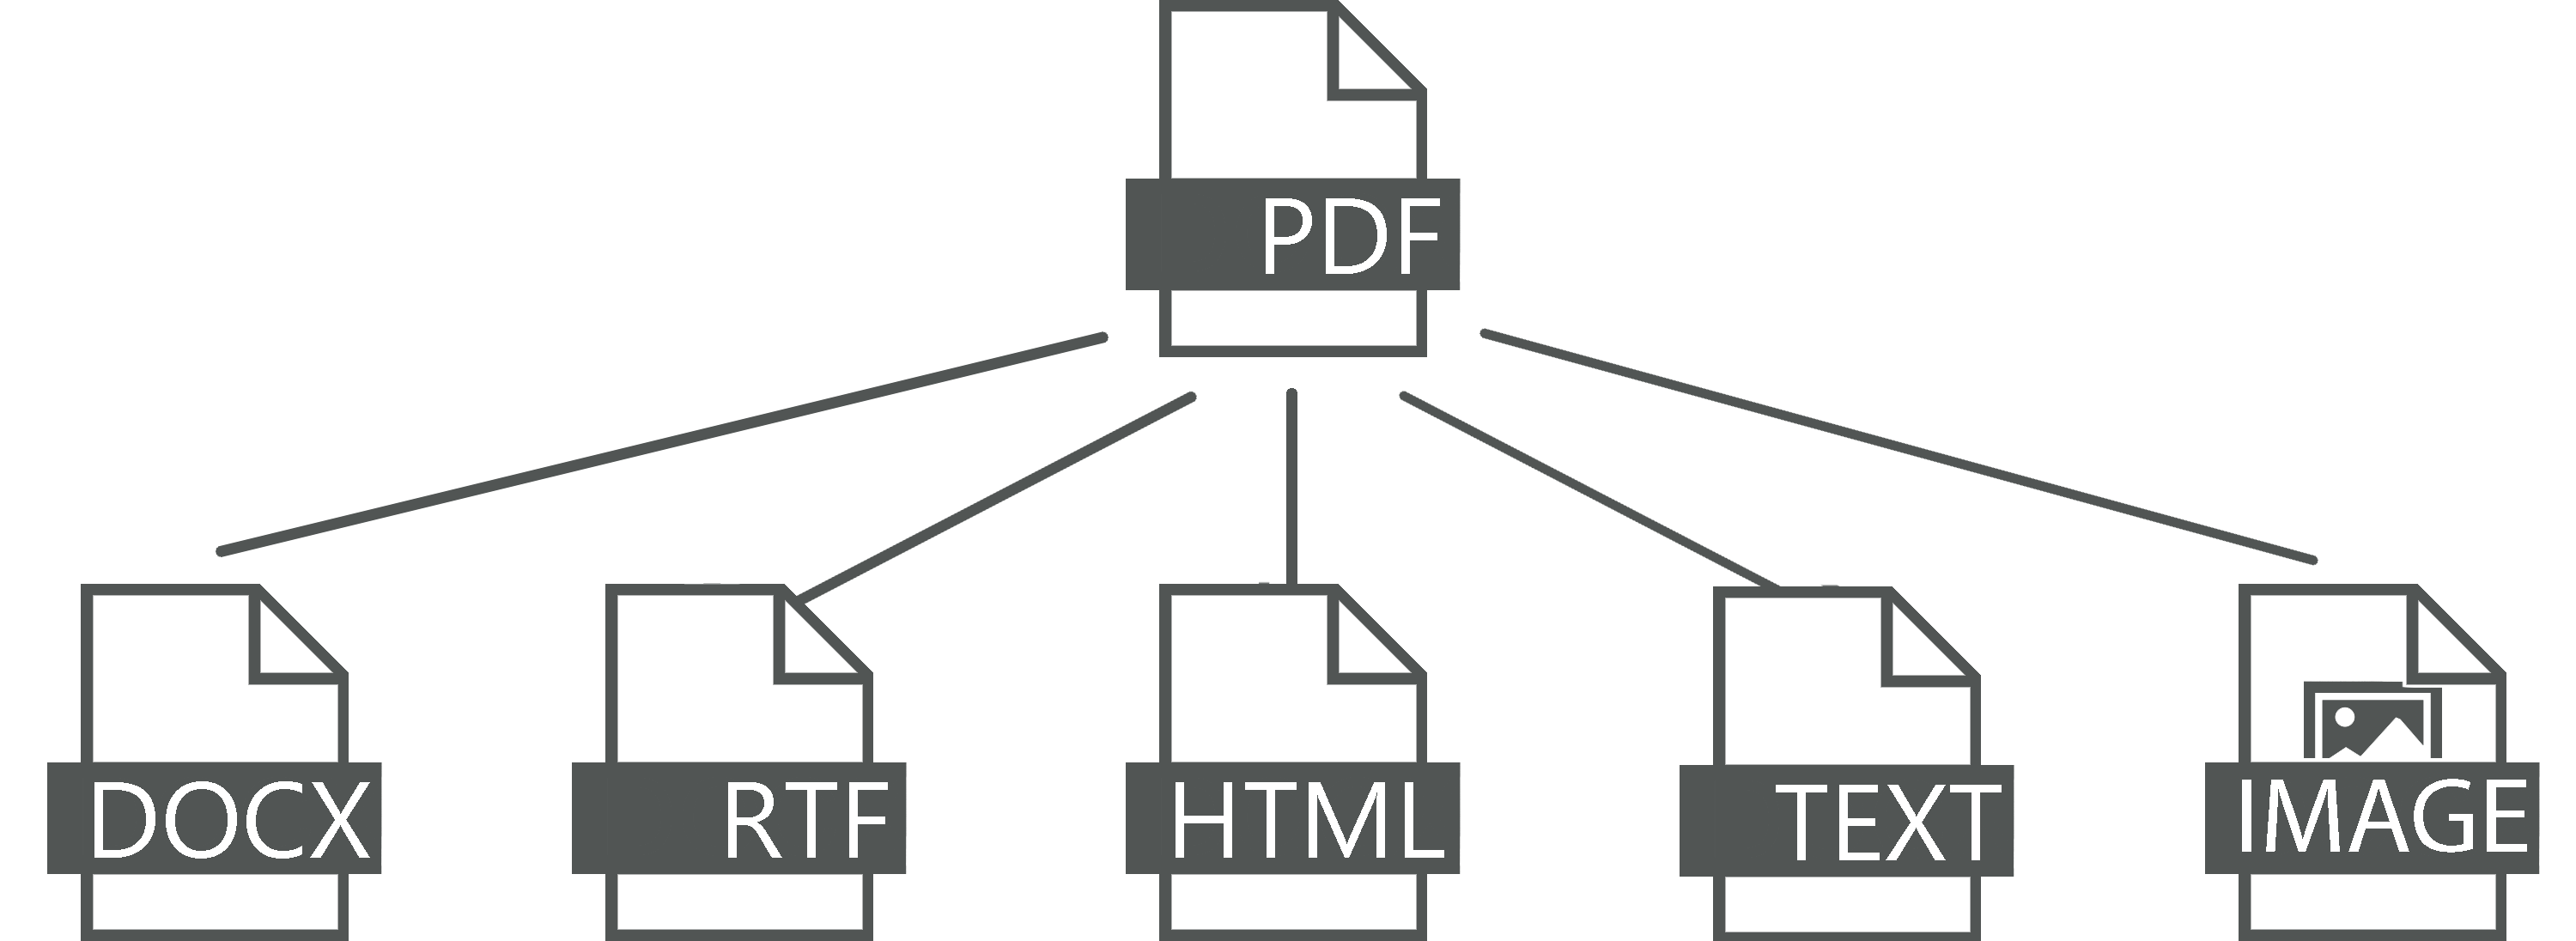 First PDF program supports converting formats such as DOCX, RTF text, JPEG, PNG, GIF, TIFF, BMP, WMF, EMF, HTML, and XLS.